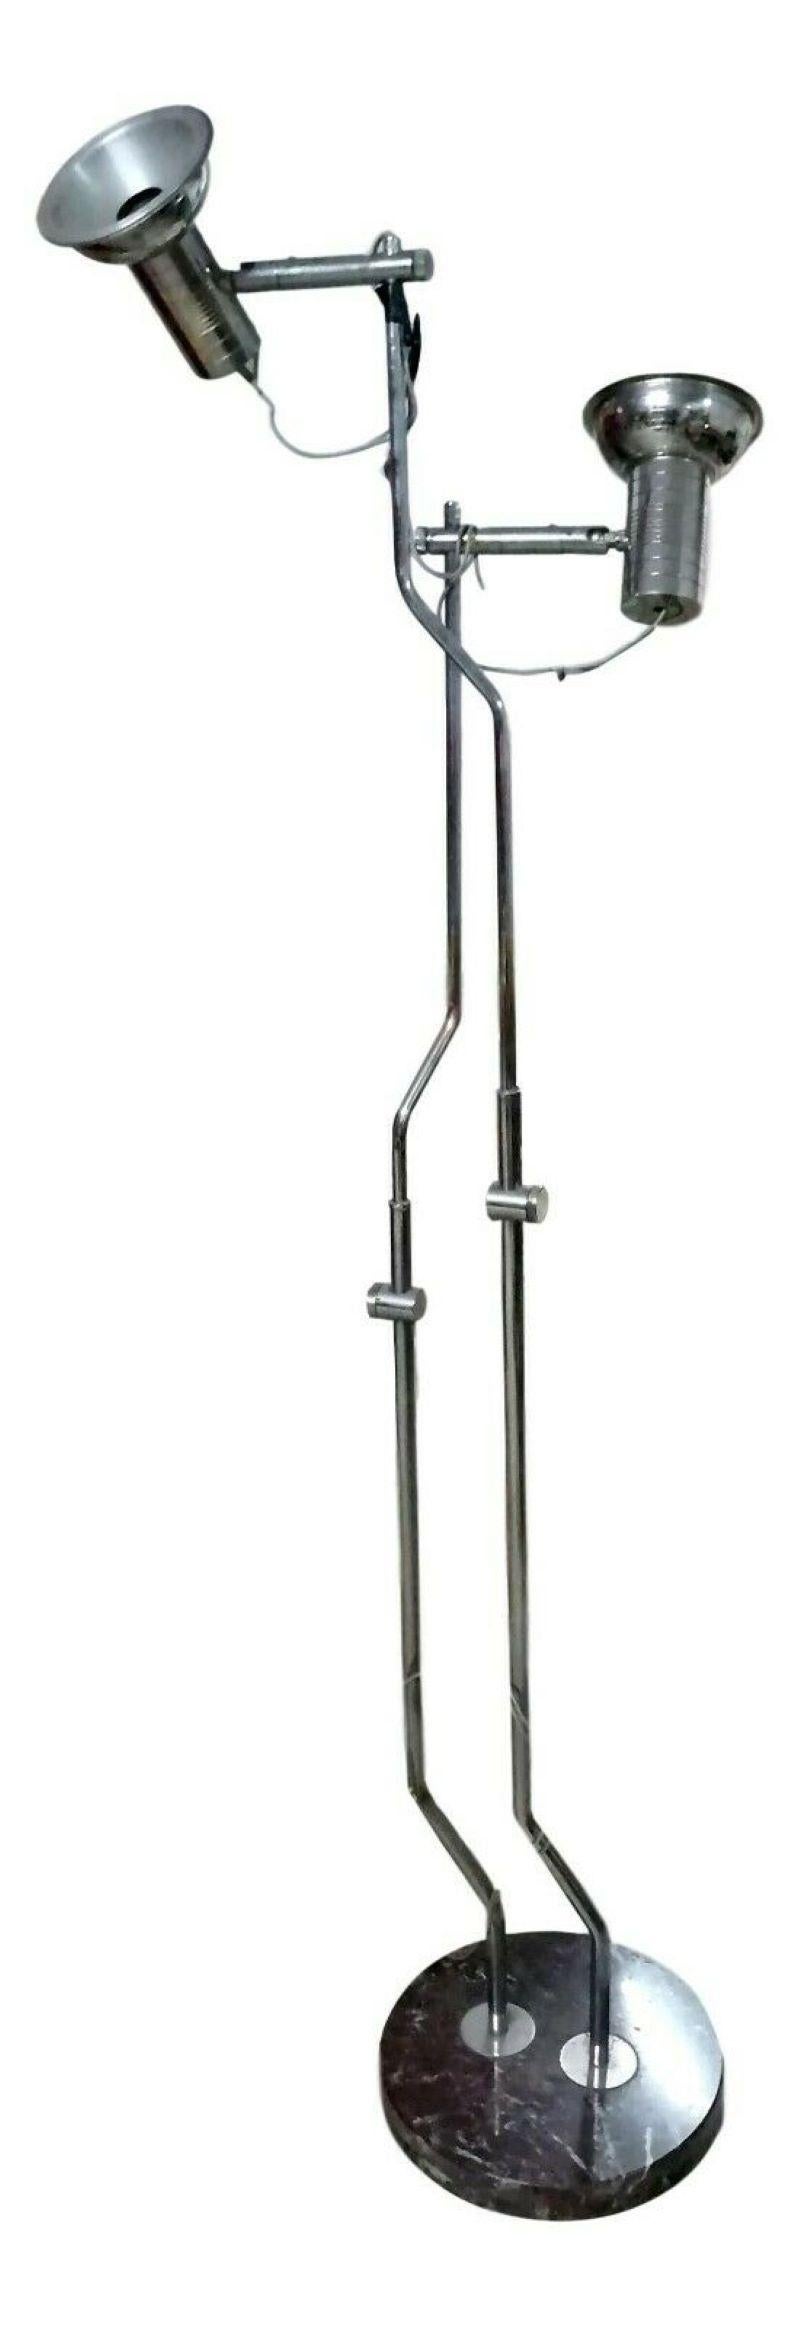 splendid original floor lamp from the 70s, steel structure with double central joint, pair of aluminum diffuser with arms and joints adjustable in all positions

the lamp can assume different configurations due to all the joints present on the